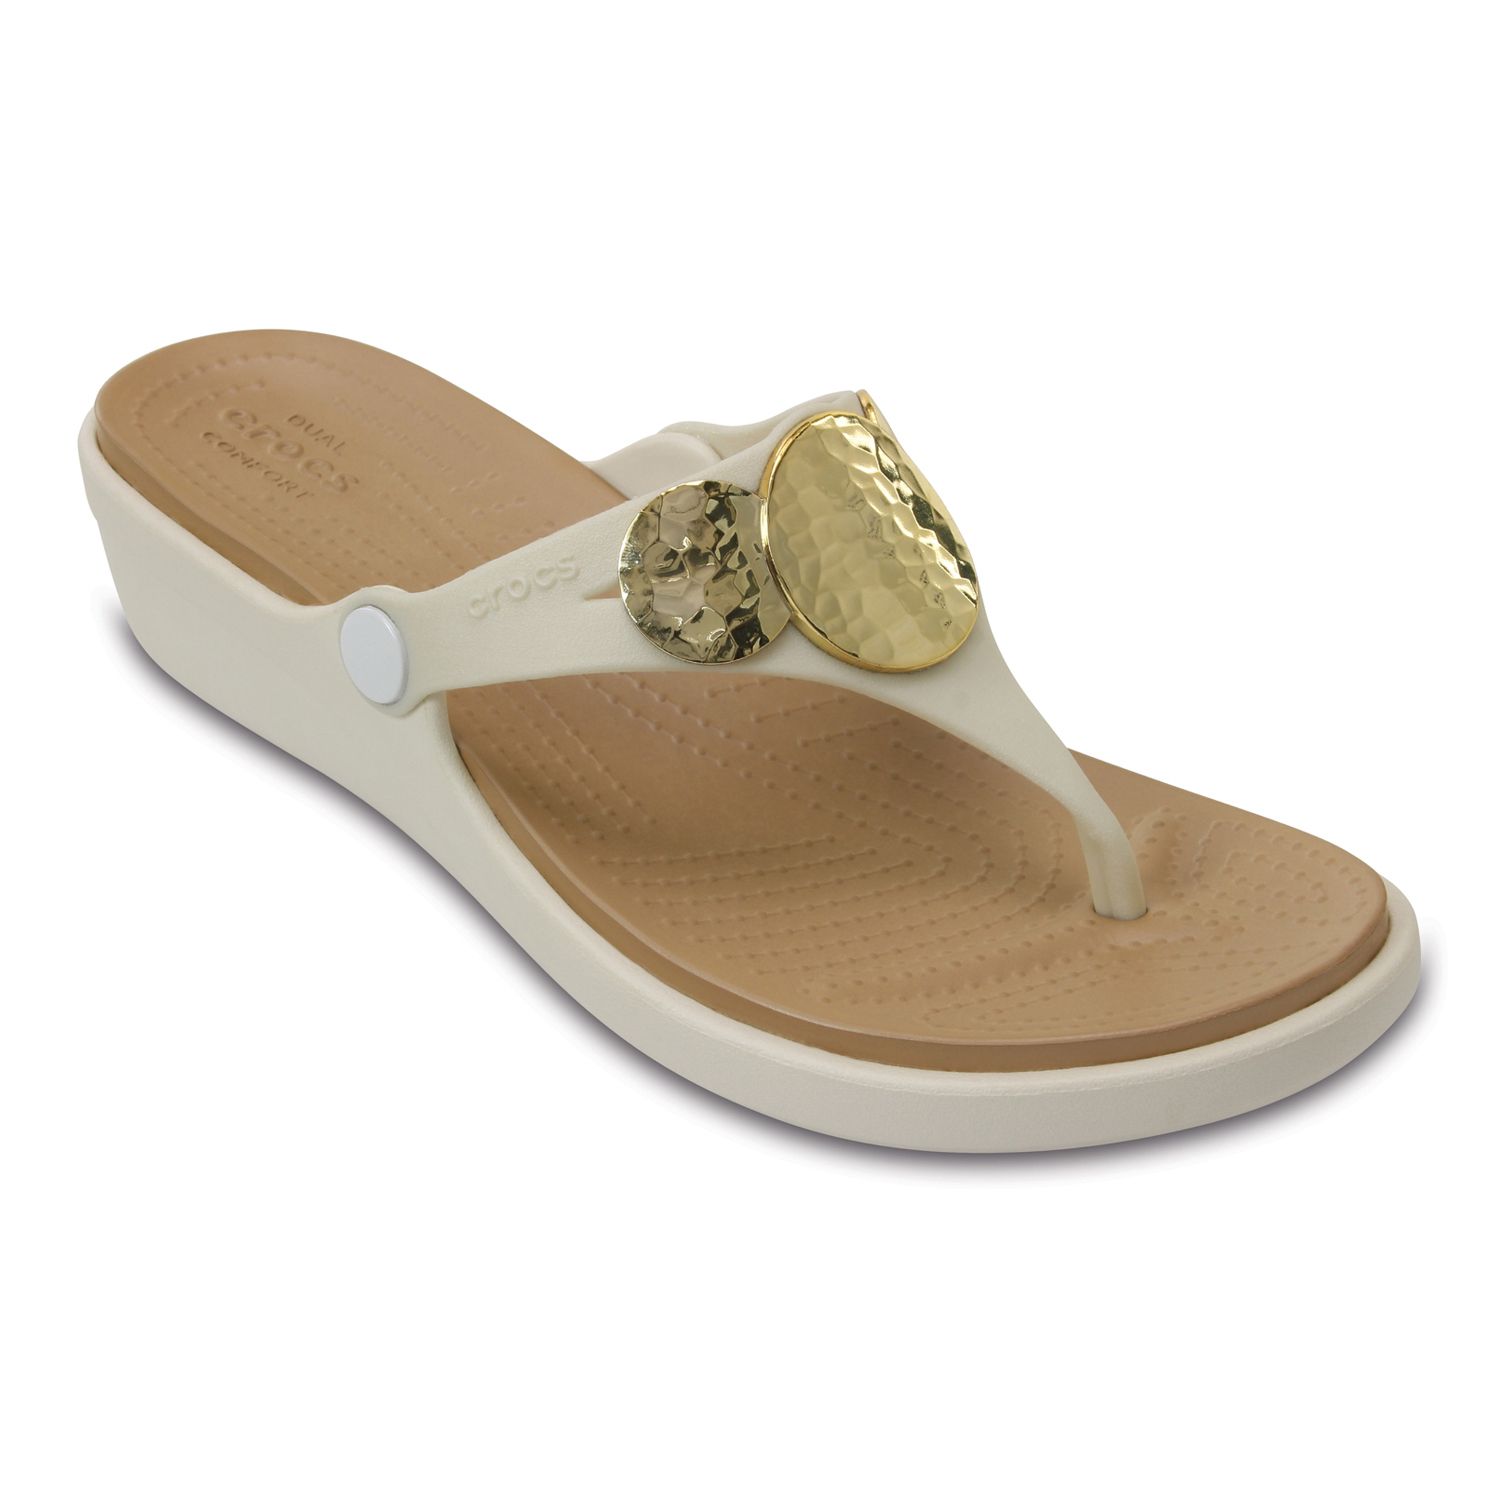 Details about   New CROCS Sanrah Diamante Oyster/ Rose Gold Wedge Flip Womens Shoes Size 7,8,9